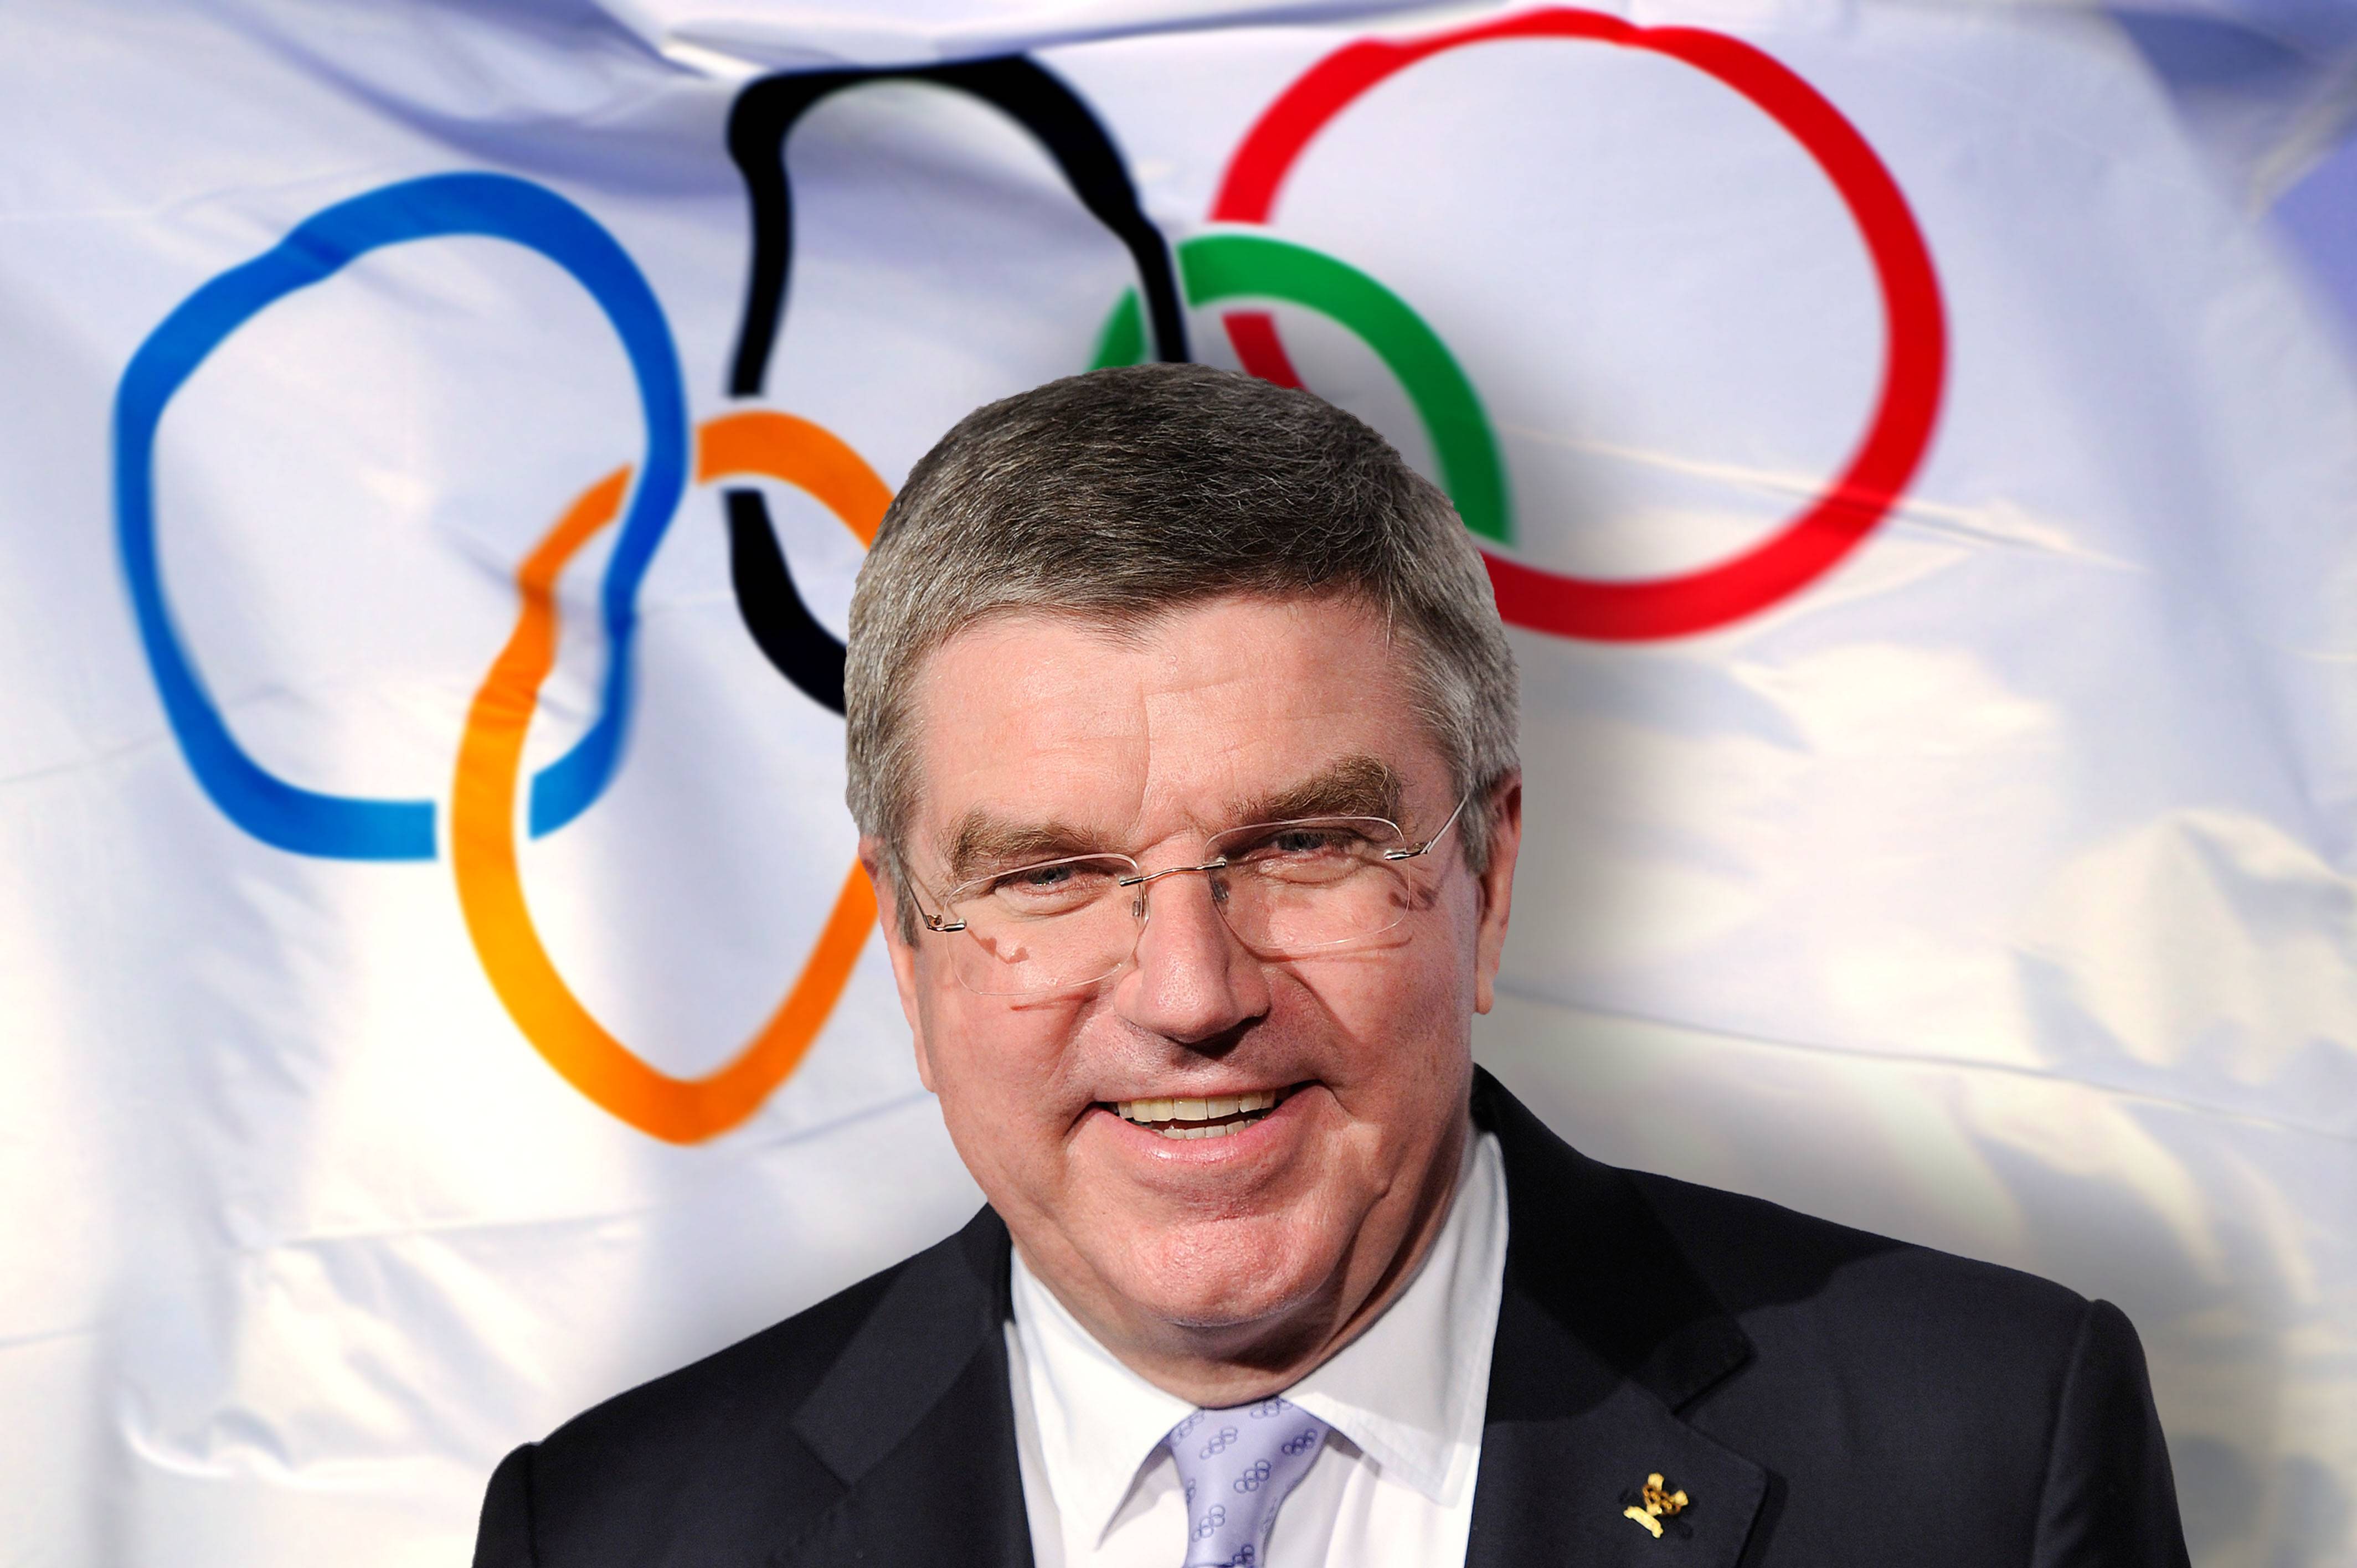 IOC president to discus Tokyo 2020 with various sporting federations